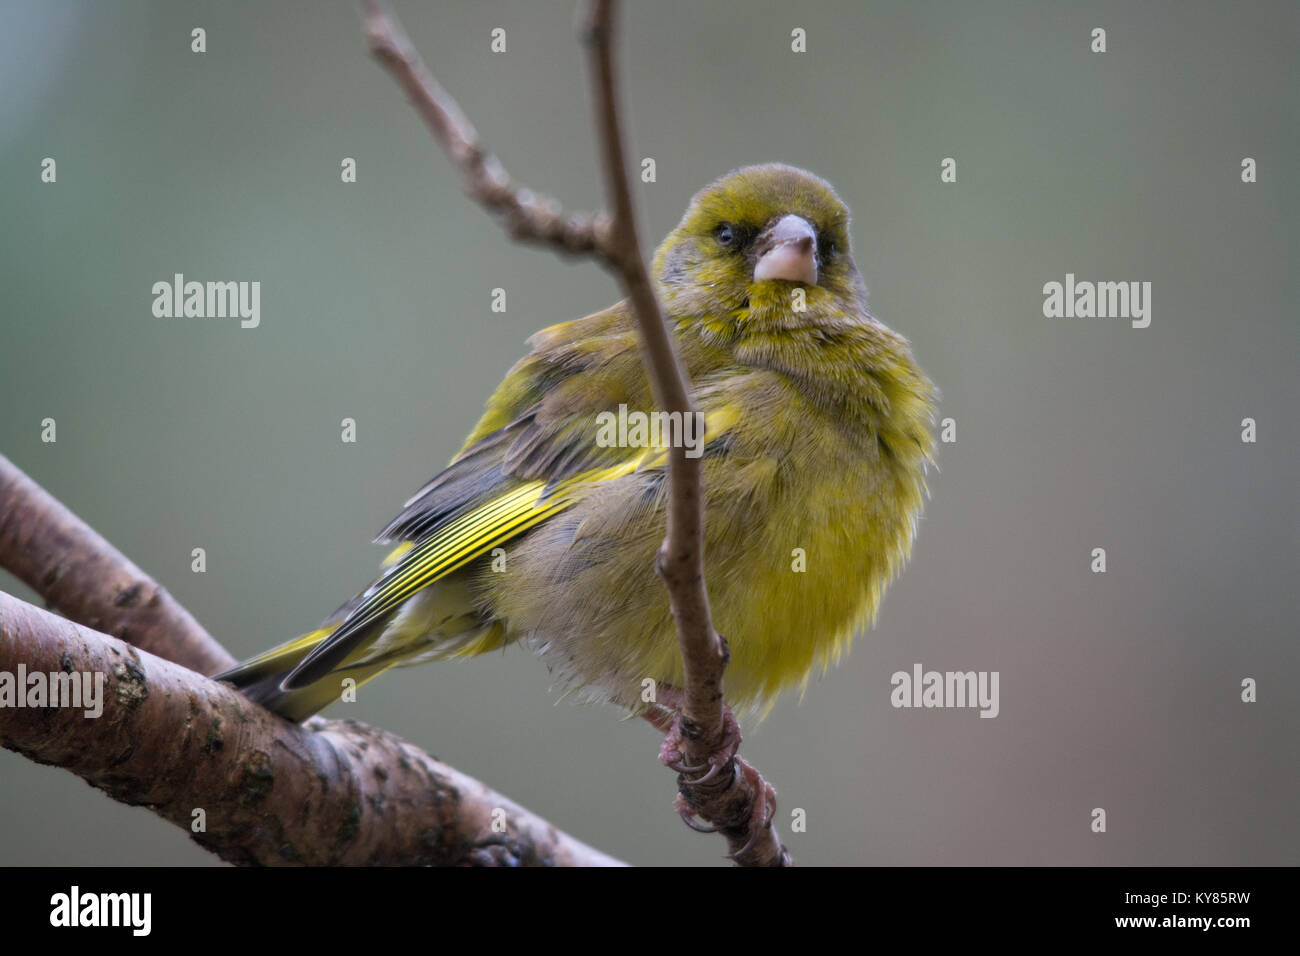 Greenfinch (Chloris chloris) bird suffering from the parasitic disease, trichomonosis, which is caused by the protozoan Trichomonas gallinae Stock Photo